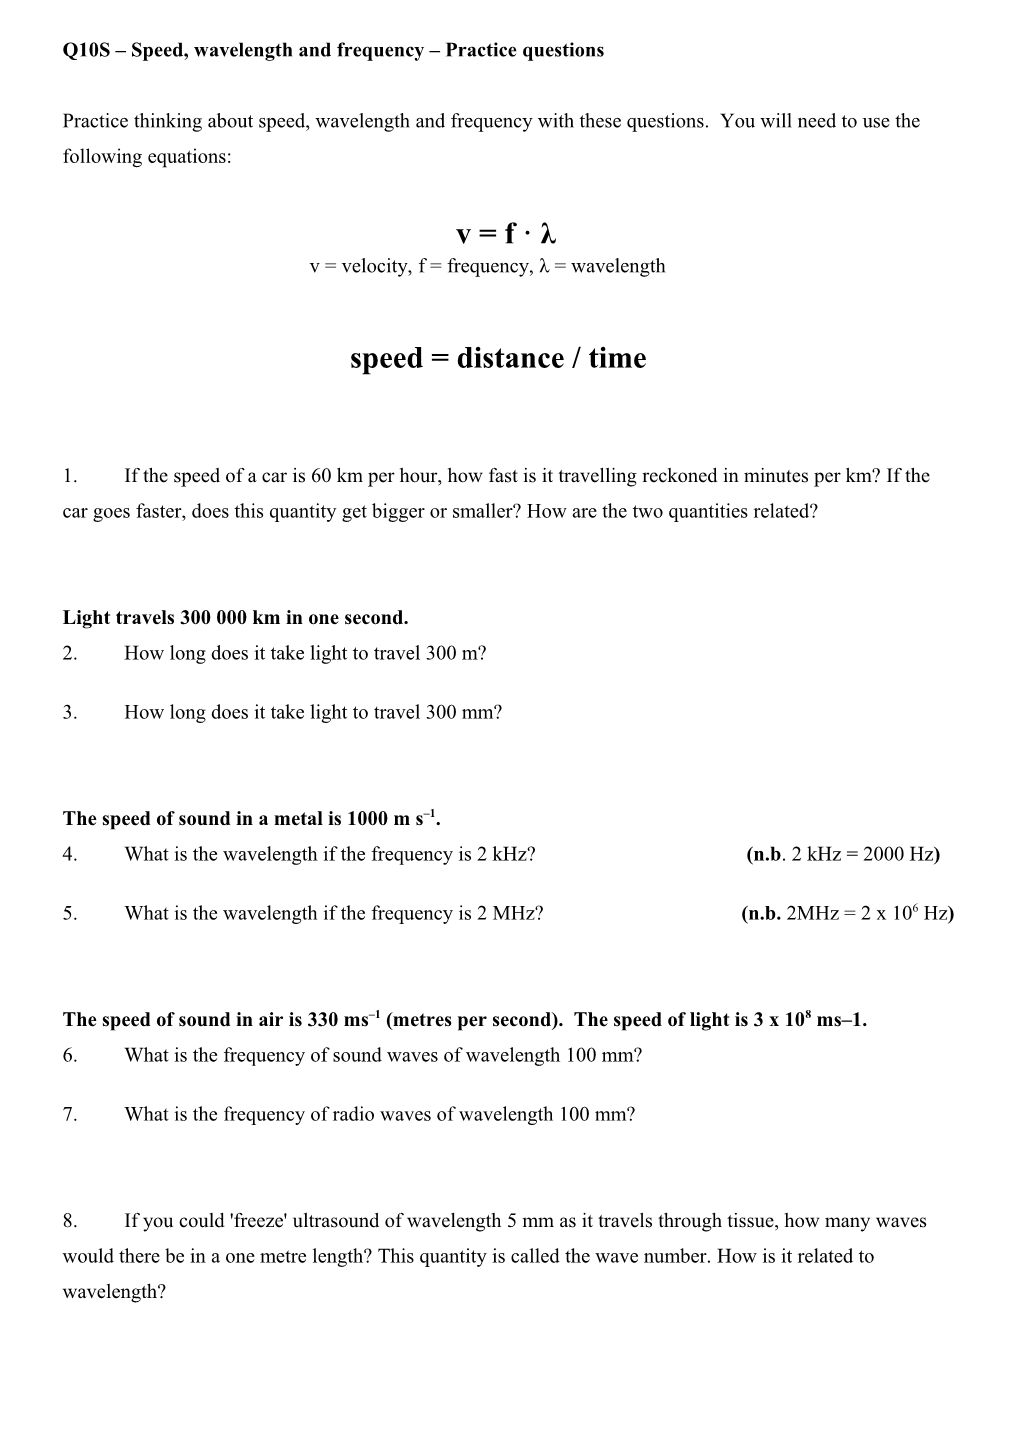 Speed, Wavelength and Frequency Practice Questions